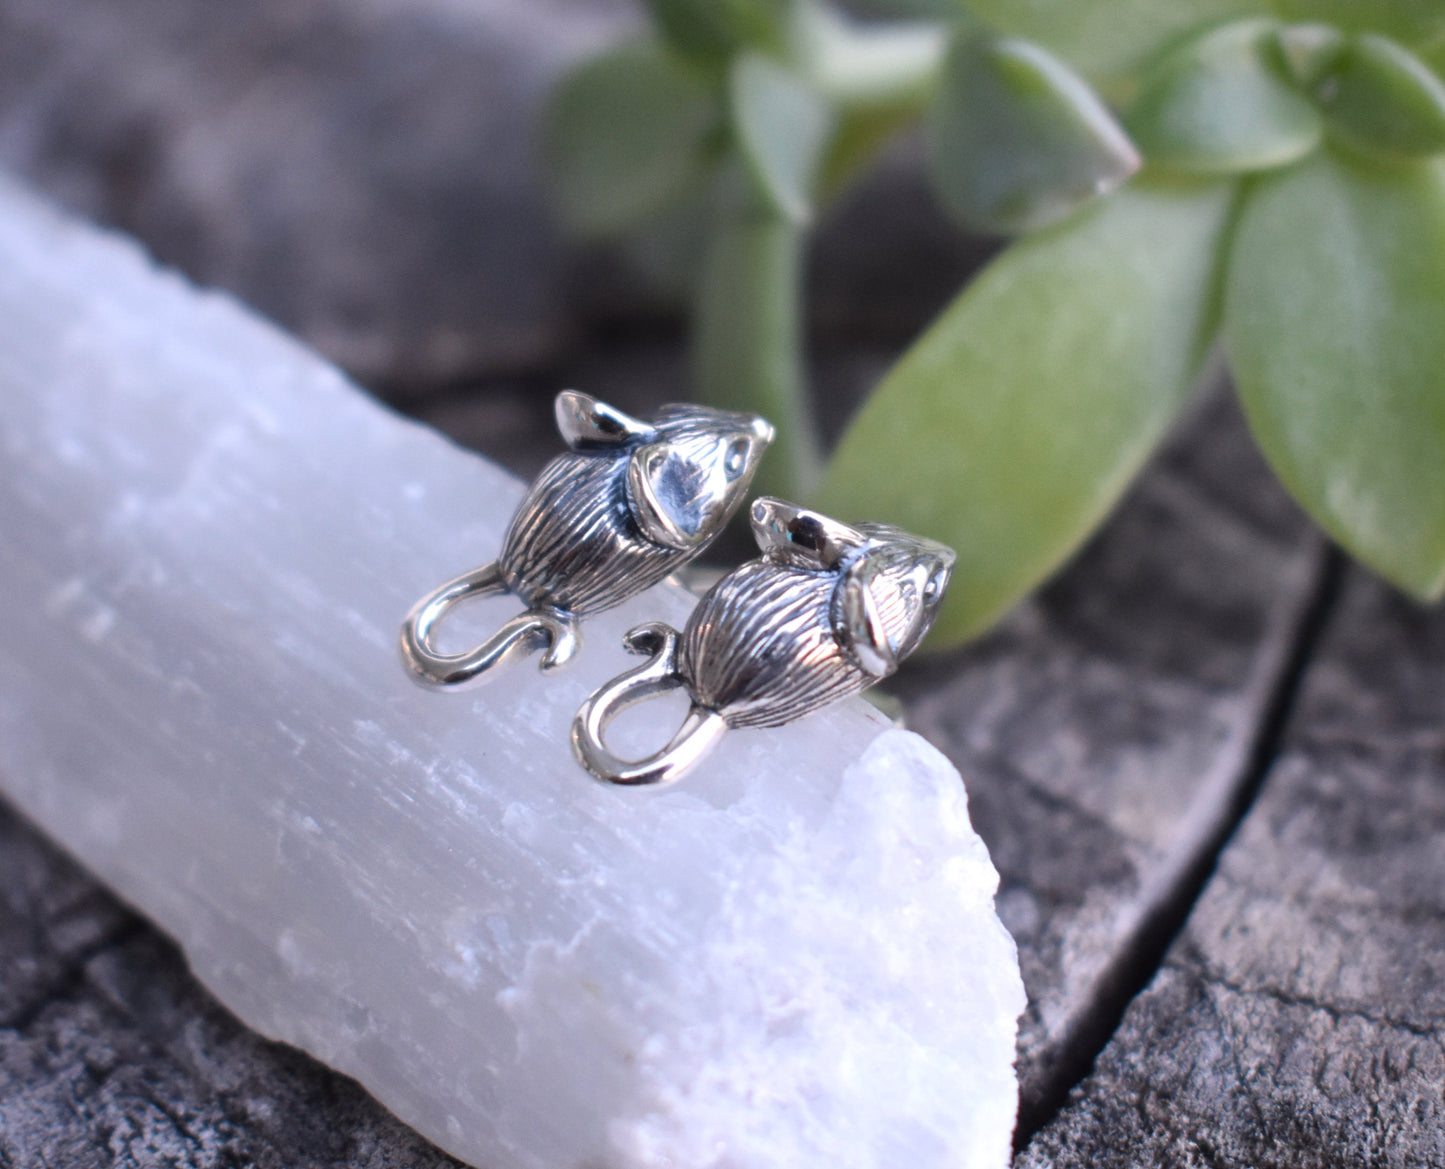 Mouse Earrings- Mouse Studs, Mouse Jewelry, Pet Mouse-Sterling Silver Earrings